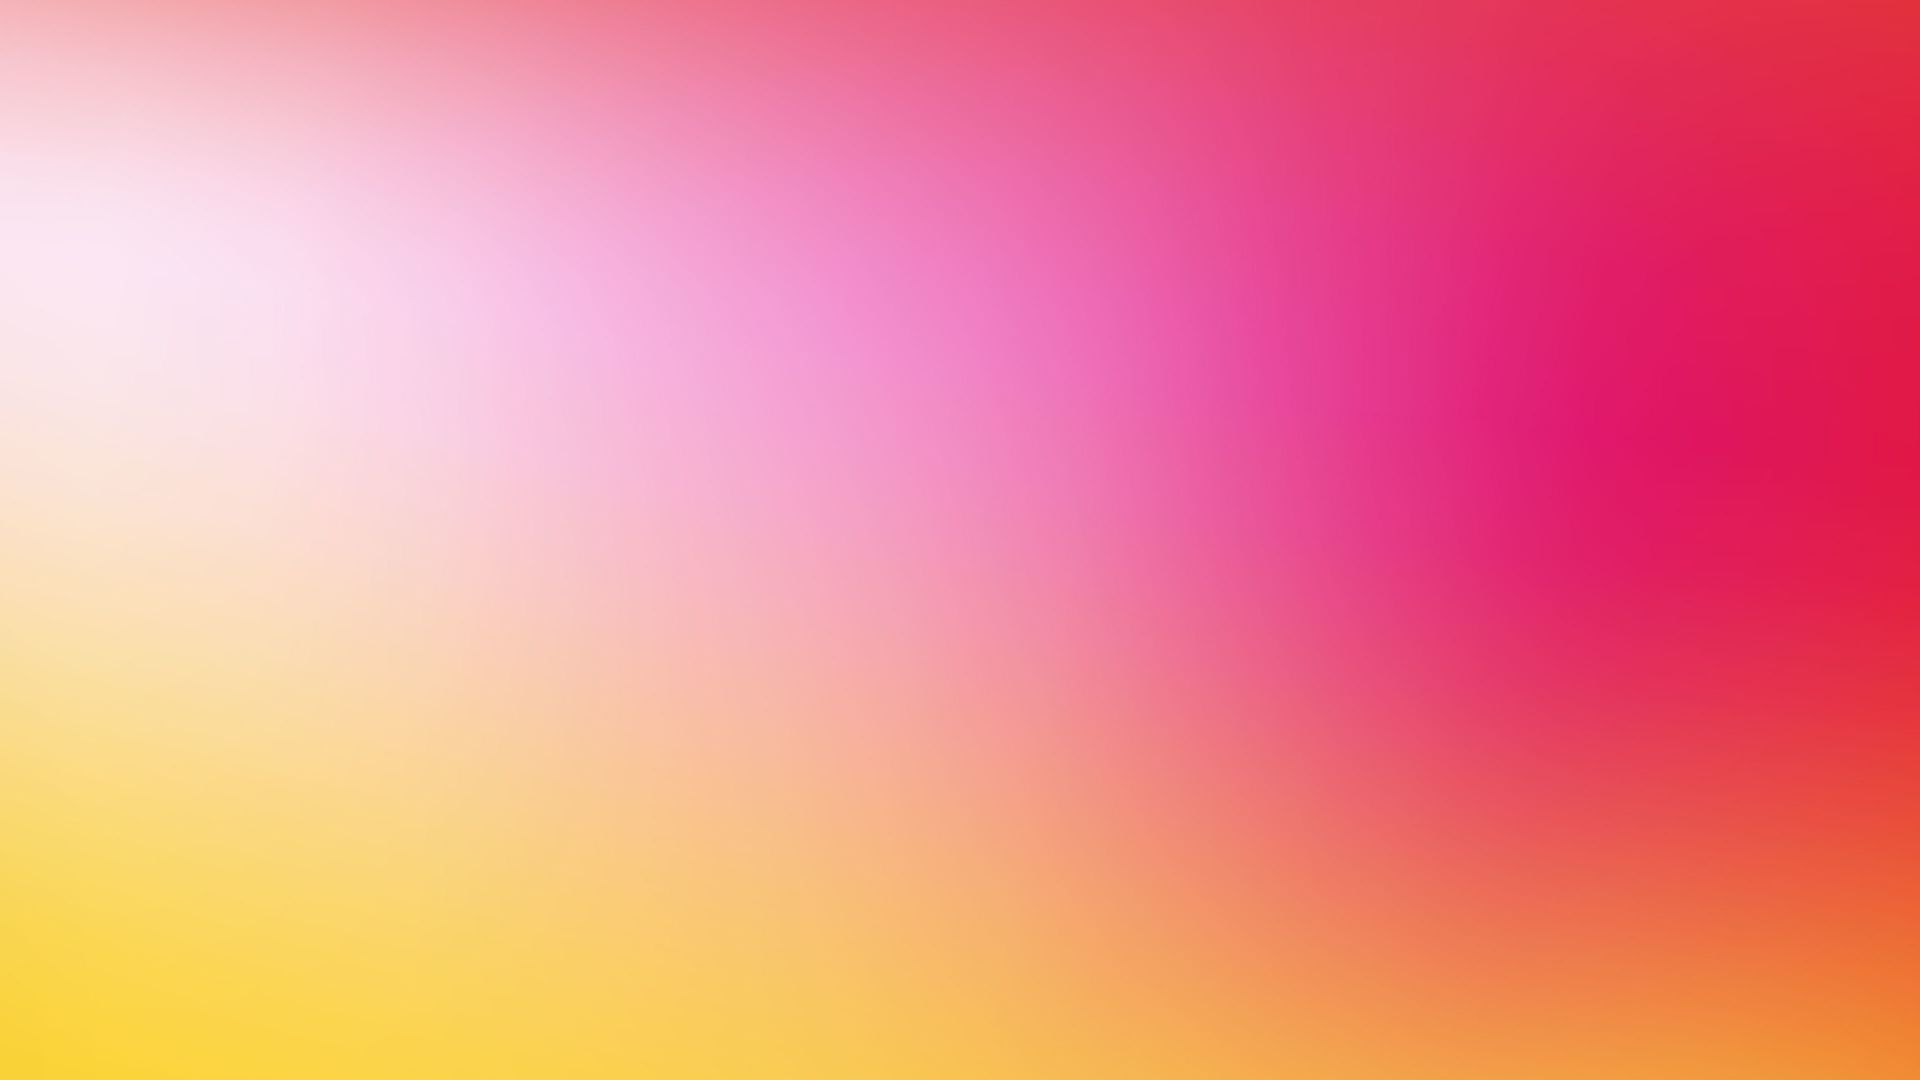 Desktop wallpaper gradient, yellow and pink colors, abstract, HD image, picture, background, 5a6af1